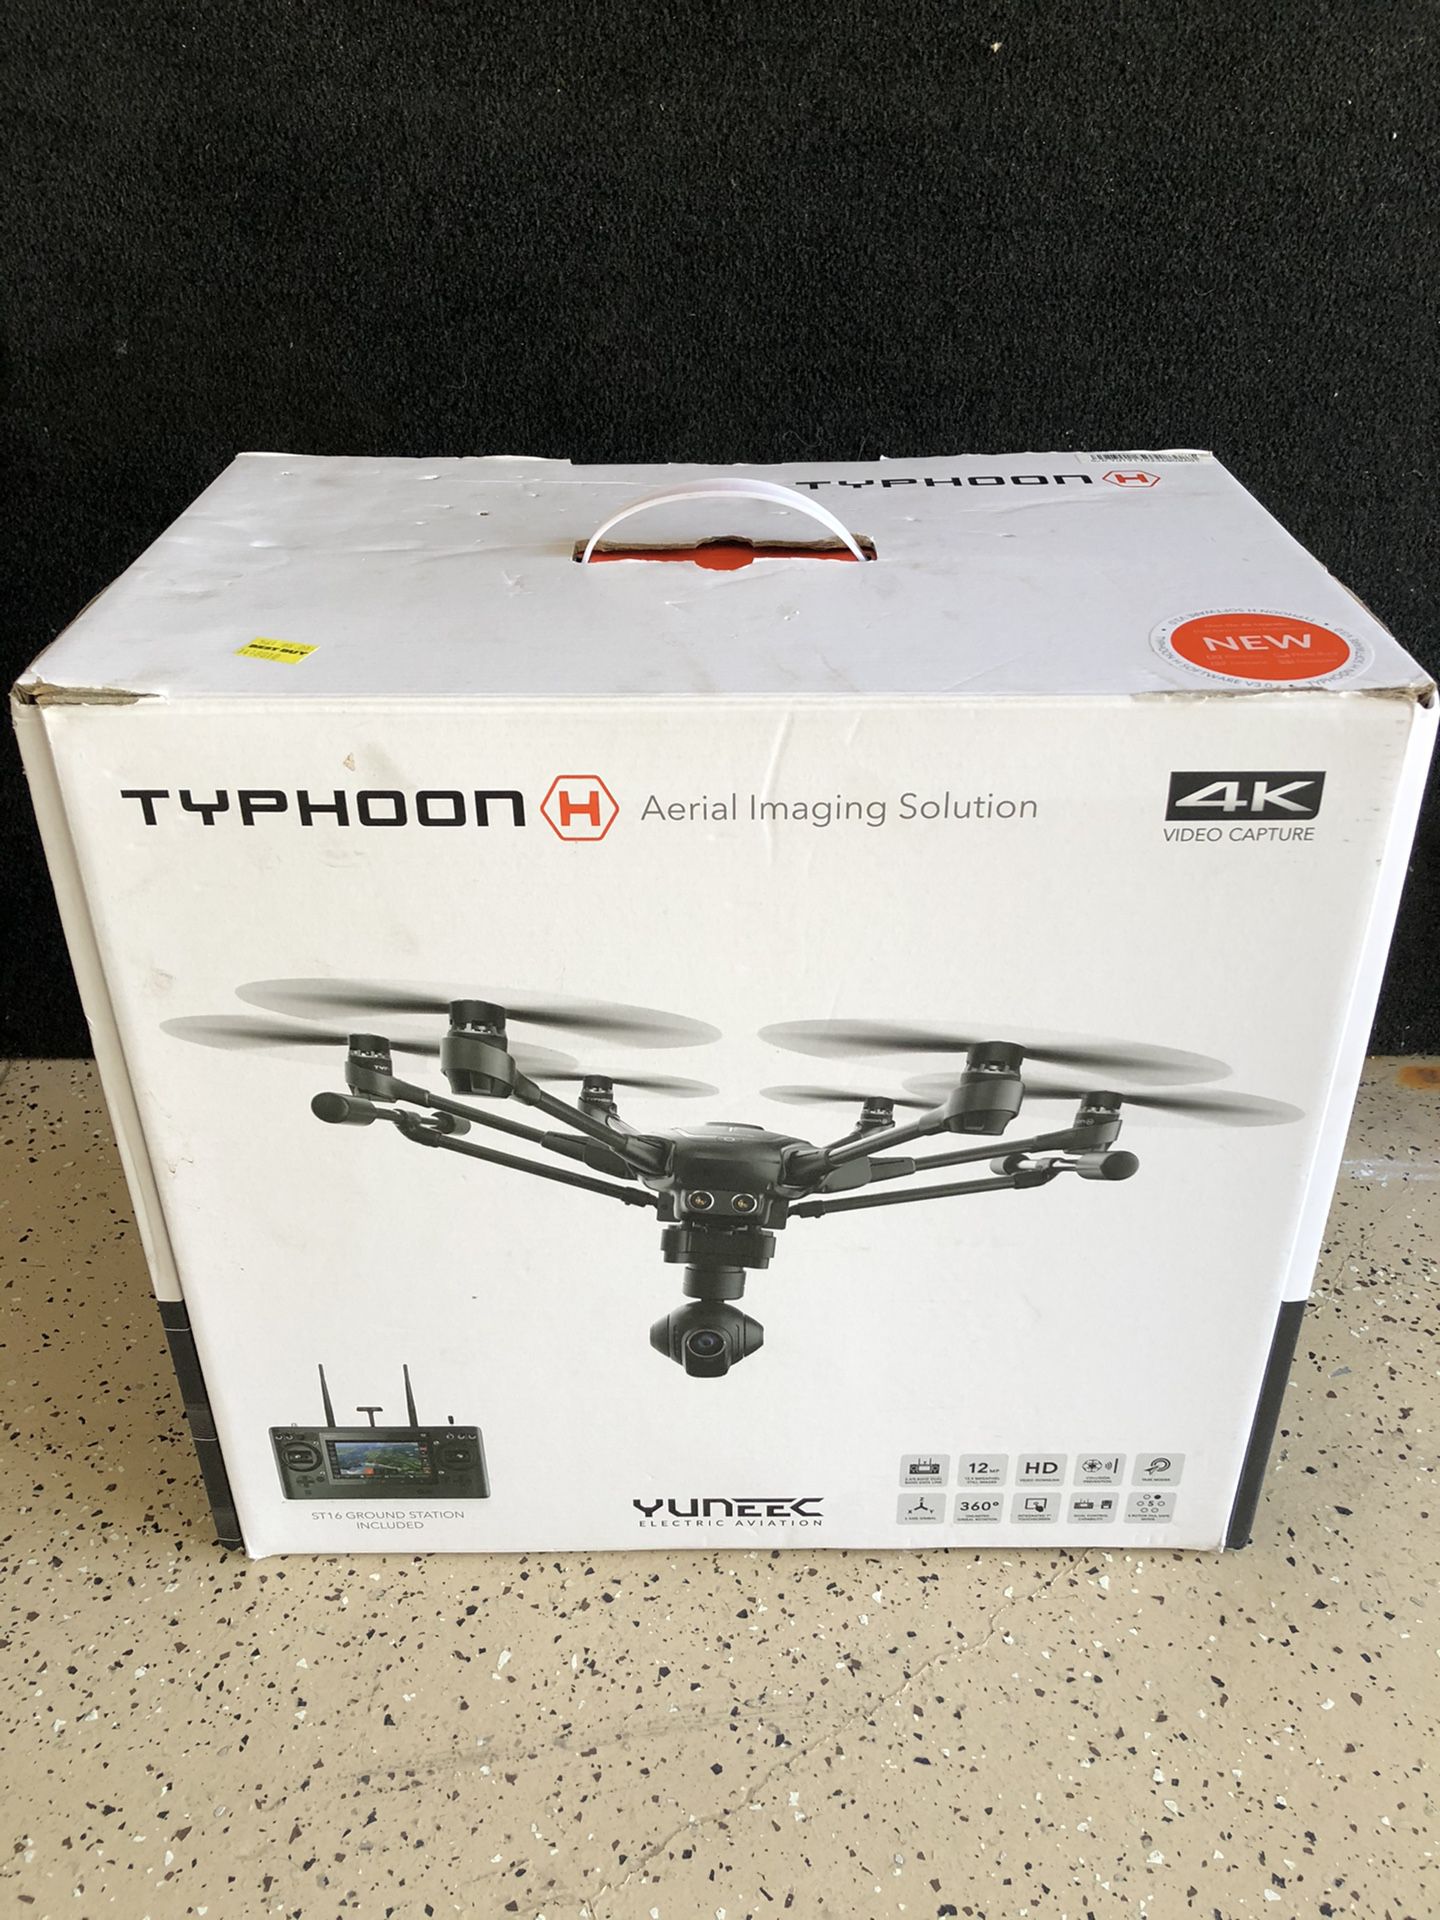 Typhoon H 4K Drone!! The ST16 Ground Station Transmitter